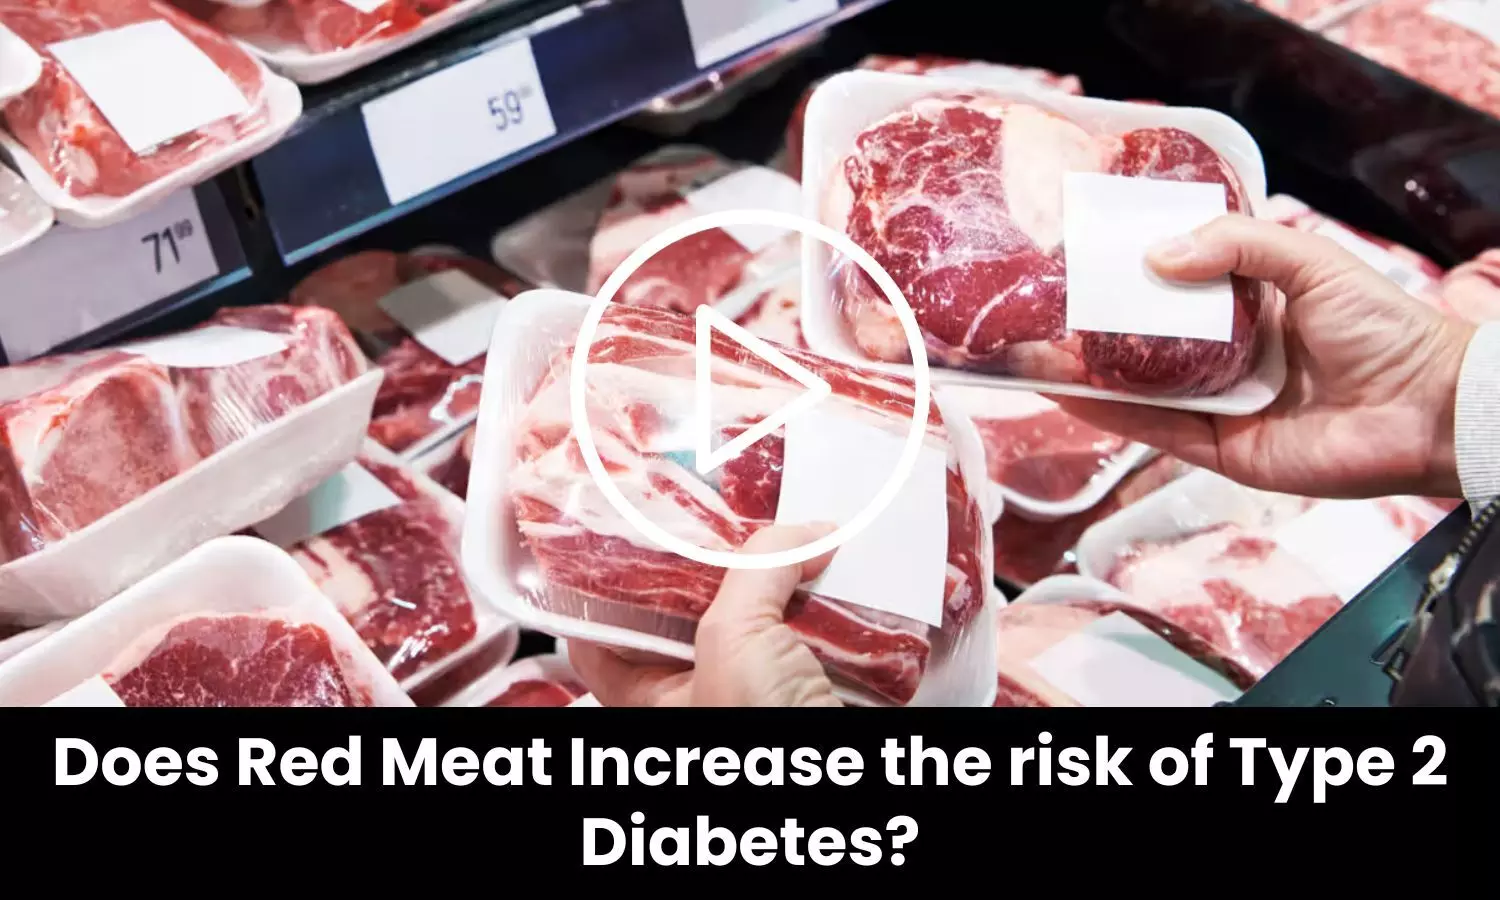 Does Red Meat Increase the risk of Type 2 Diabetes?